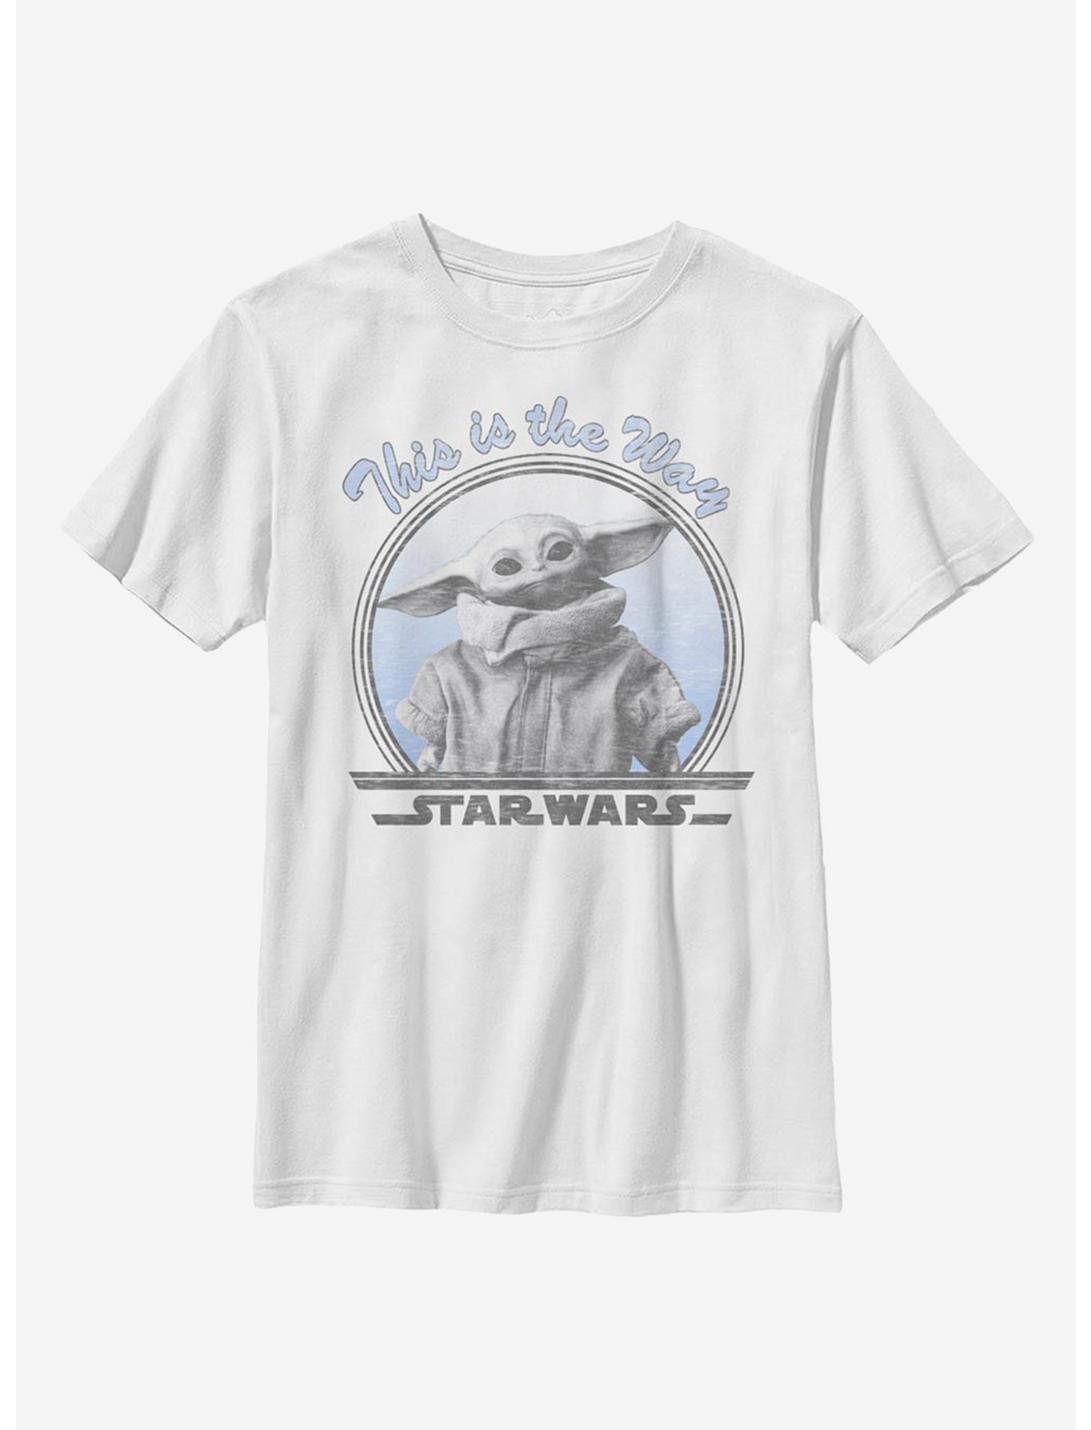 Star Wars The Mandalorian The Child Round The Way Youth T-Shirt, WHITE, hi-res